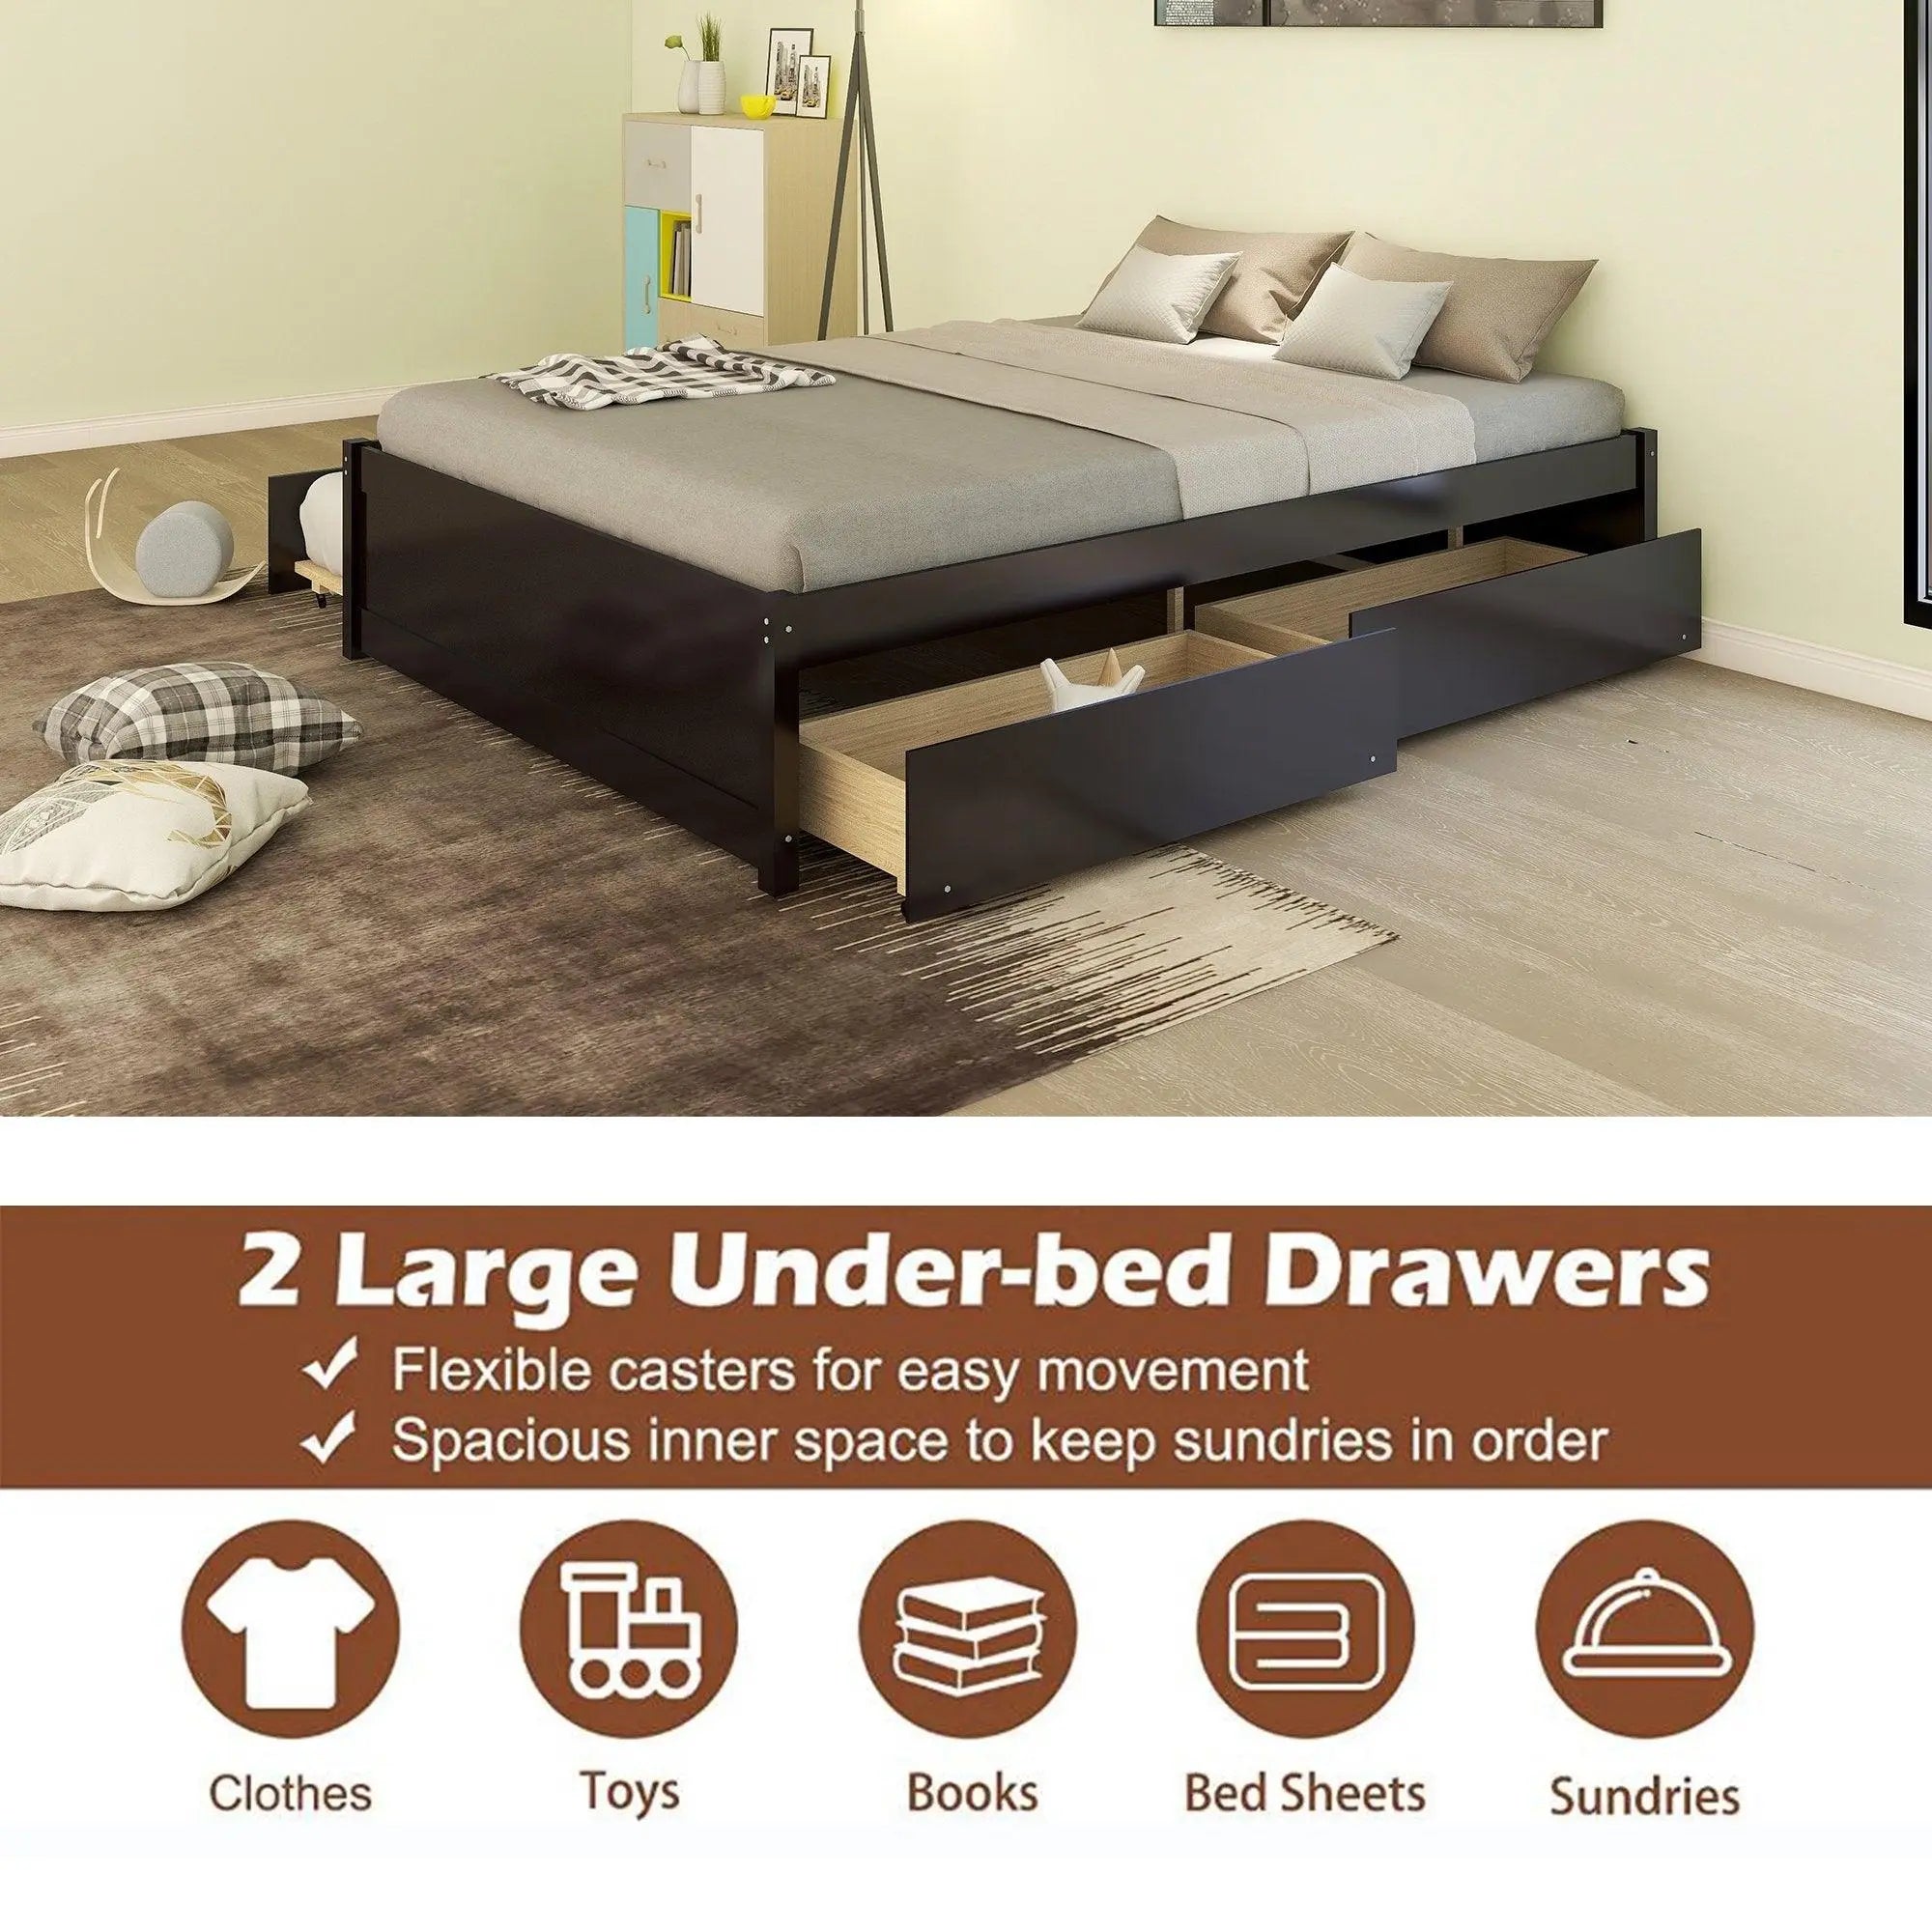 Bellemave Full Platform Bed with Twin Size Trundle&2 Drawers - Bellemave